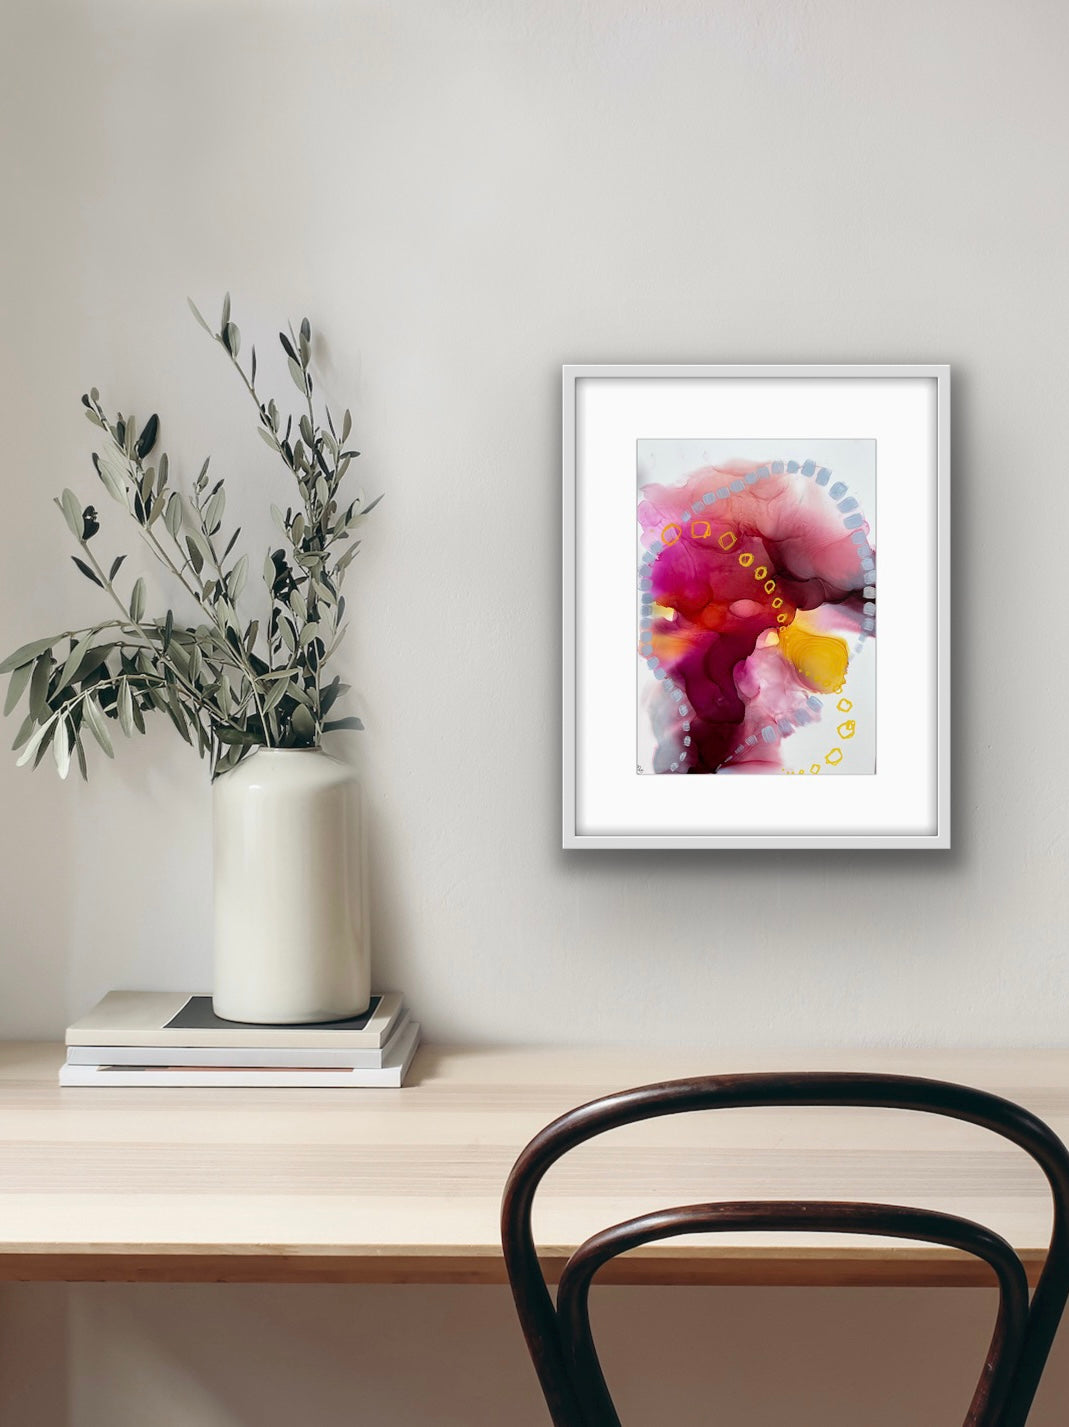 On a pink cloud - original abstract painting in red, pink and yellow.